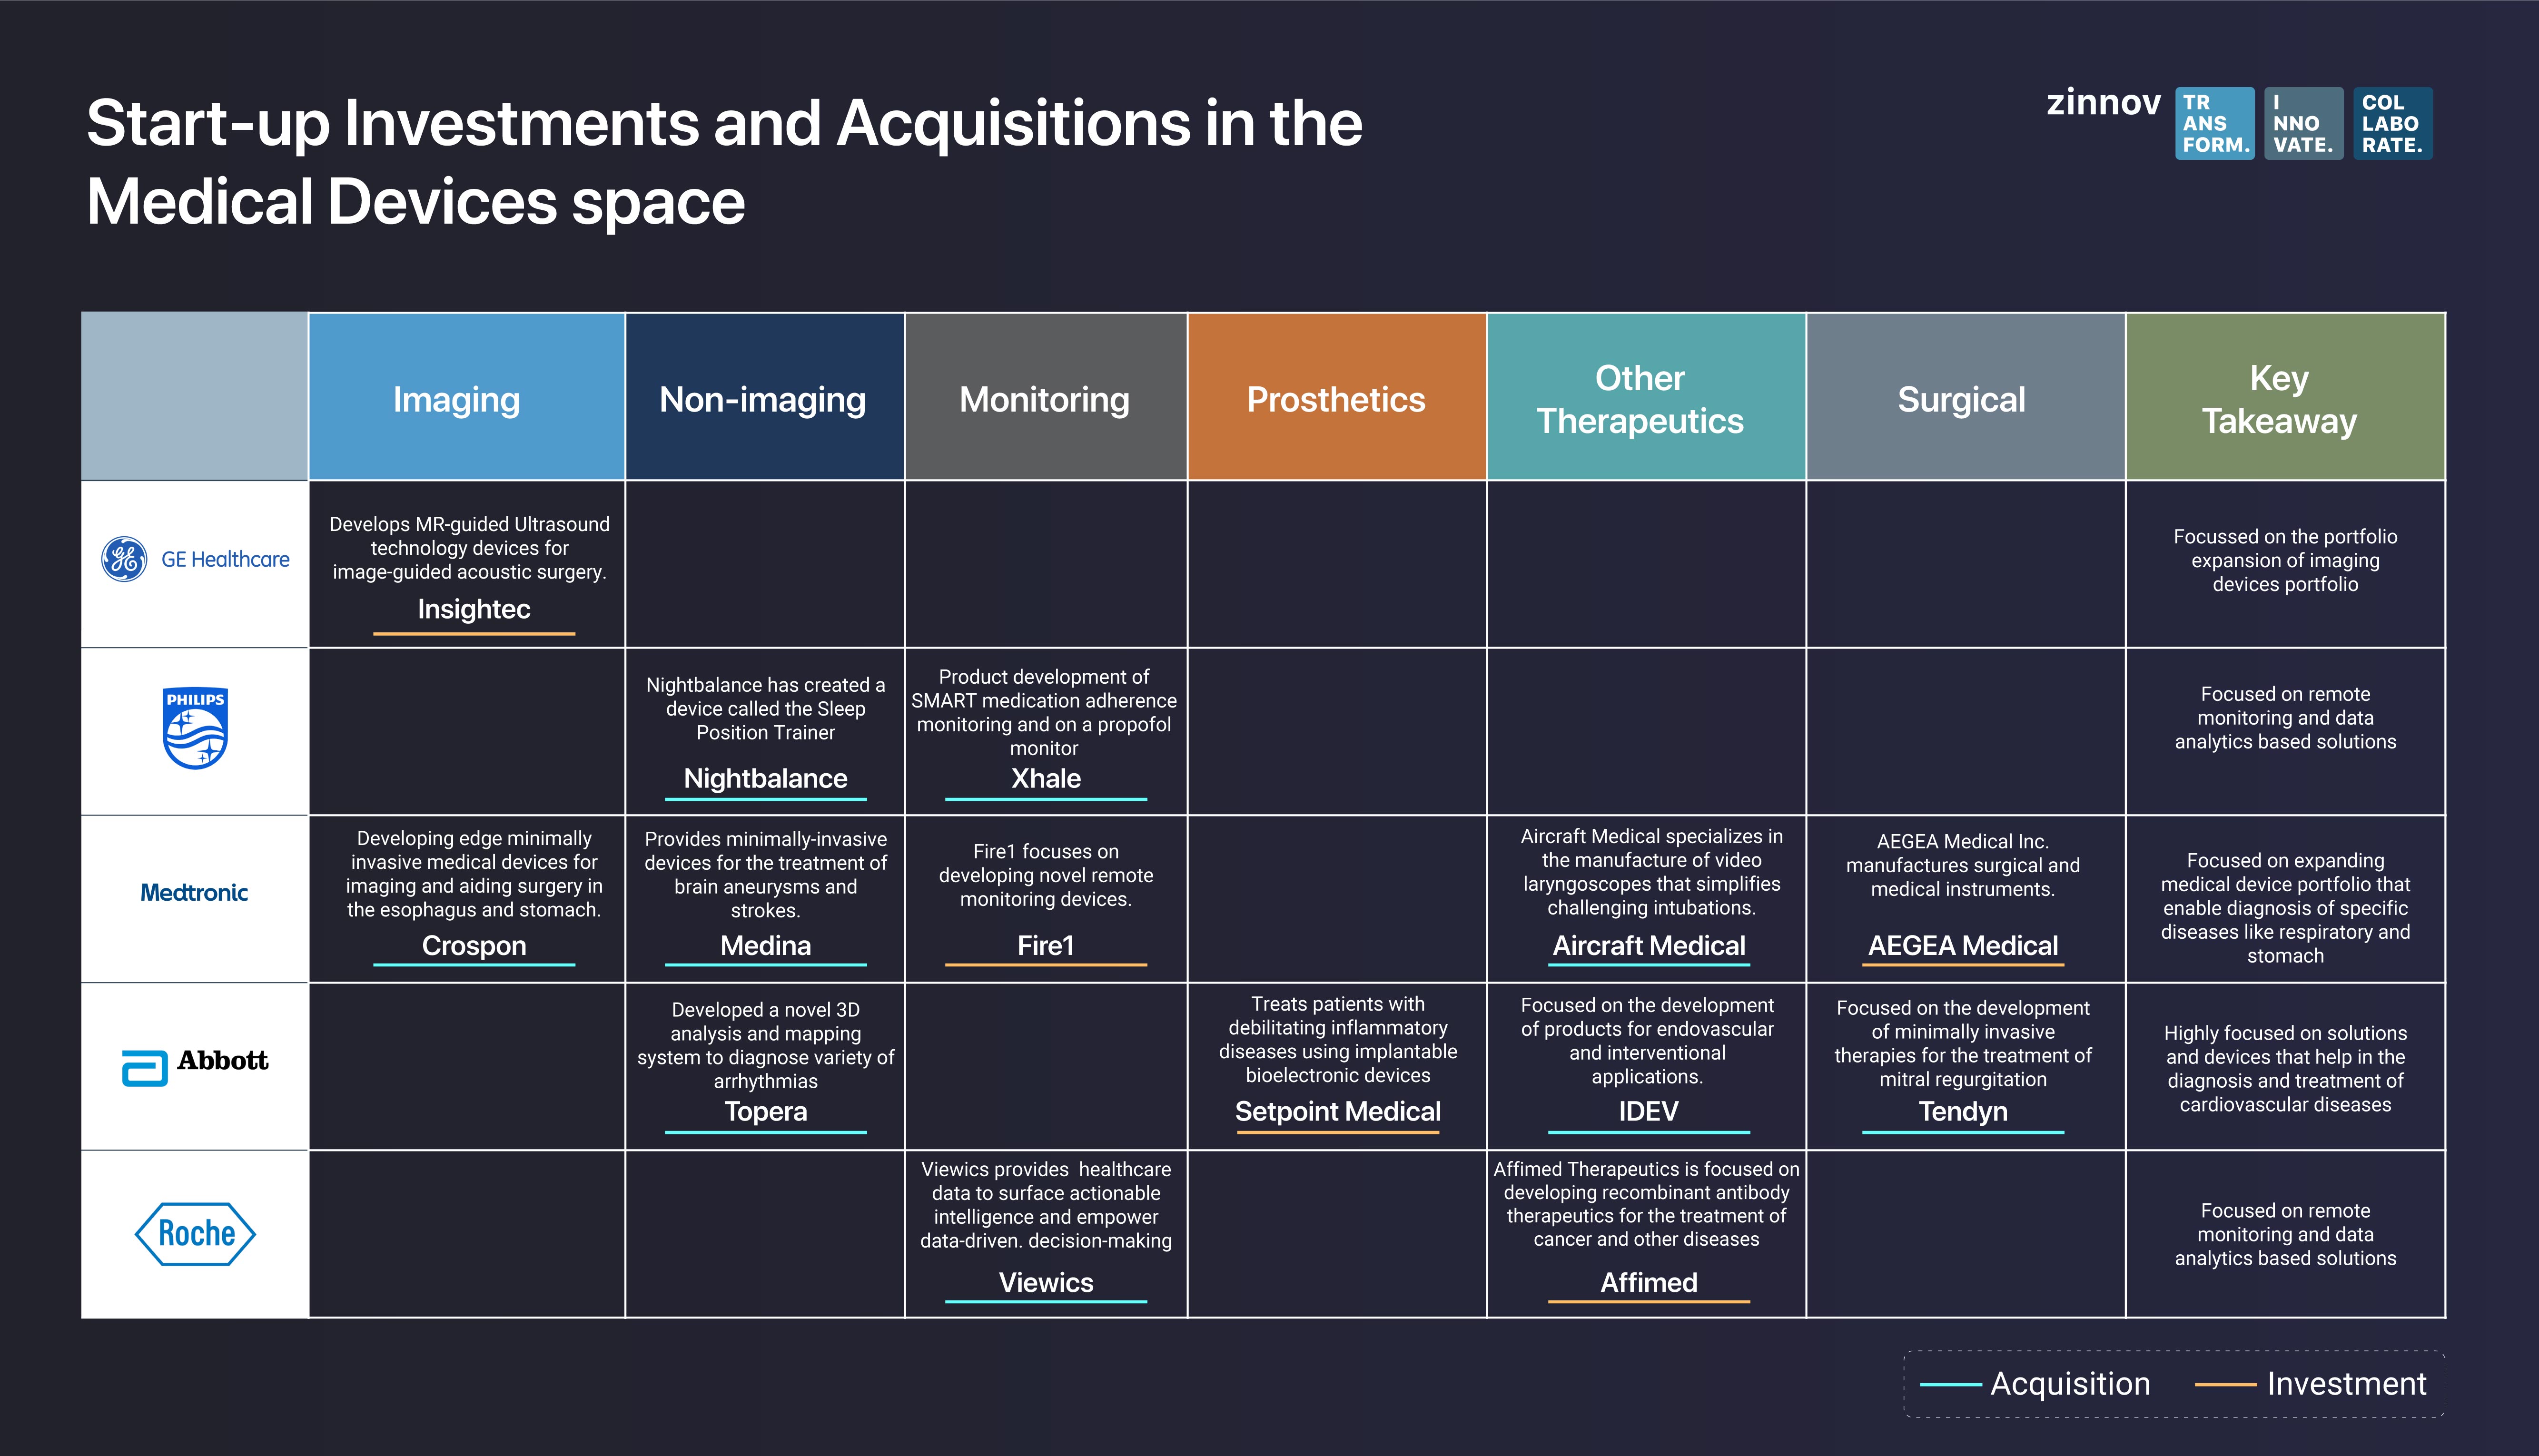 Start-up investment and acquisitions in medical device space